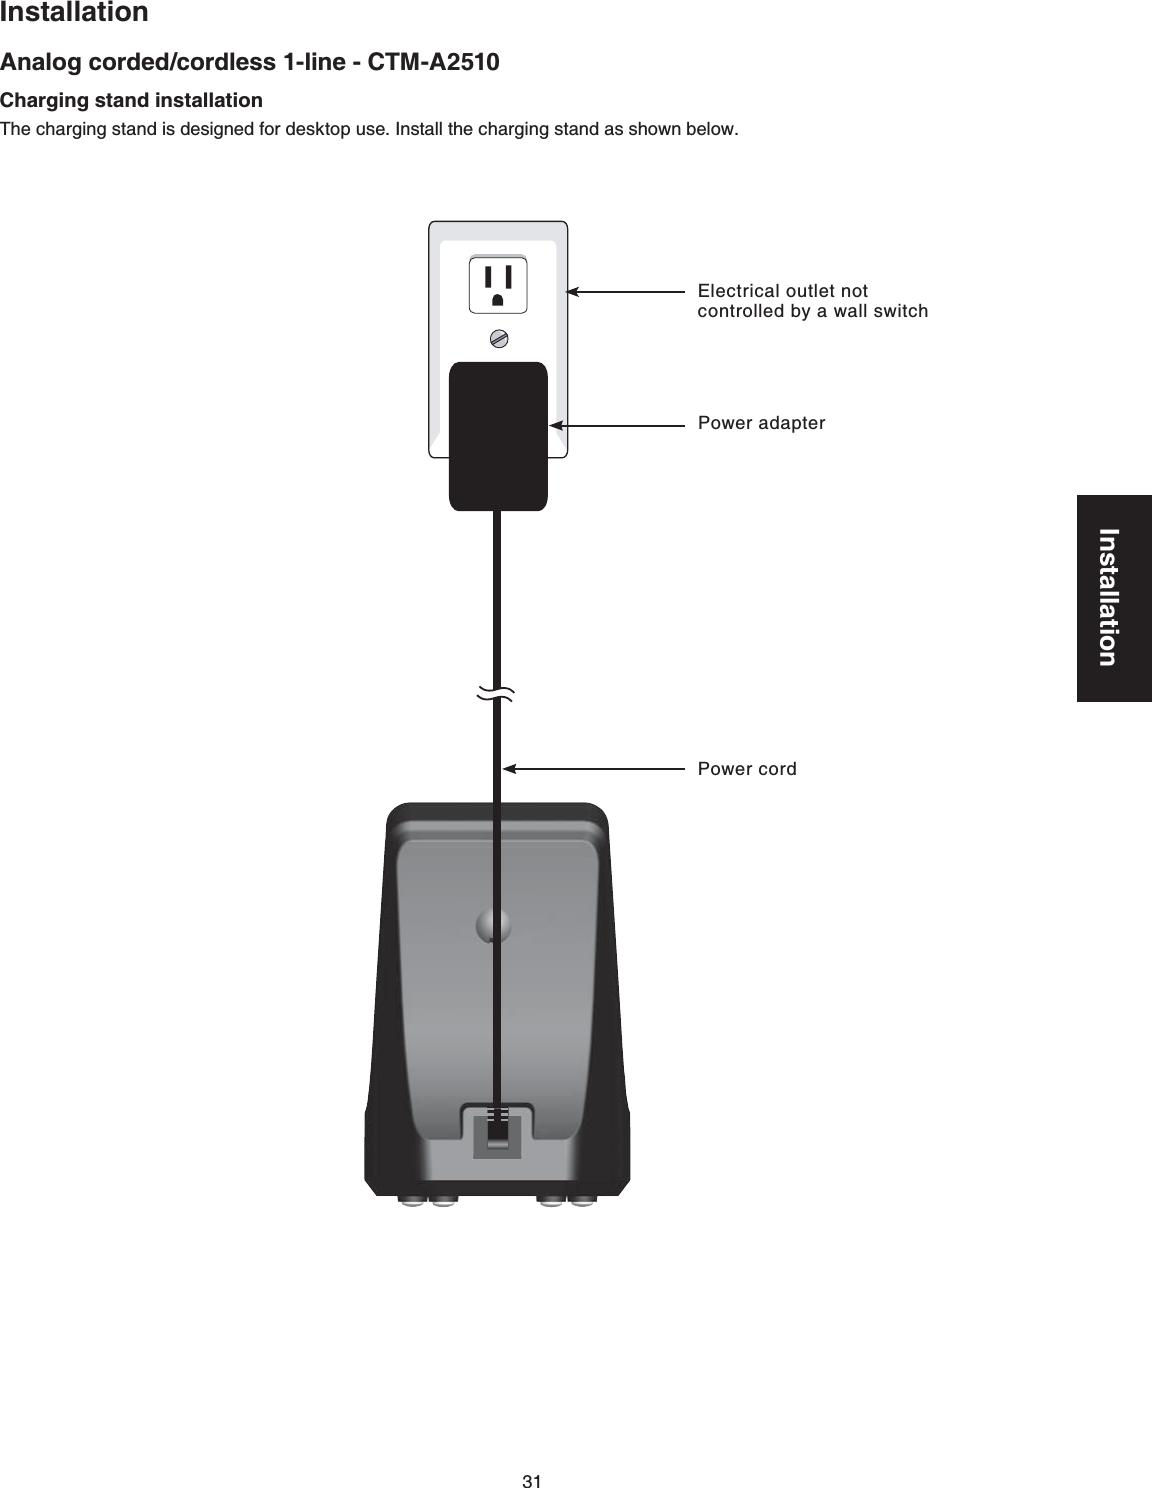 31InstallationInstallationAnalog corded/cordless 1-line - CTM-A2510Charging stand installationThe charging stand is designed for desktop use. Install the charging stand as shown below.Power adapterElectrical outlet not controlled by a wall switchPower cord